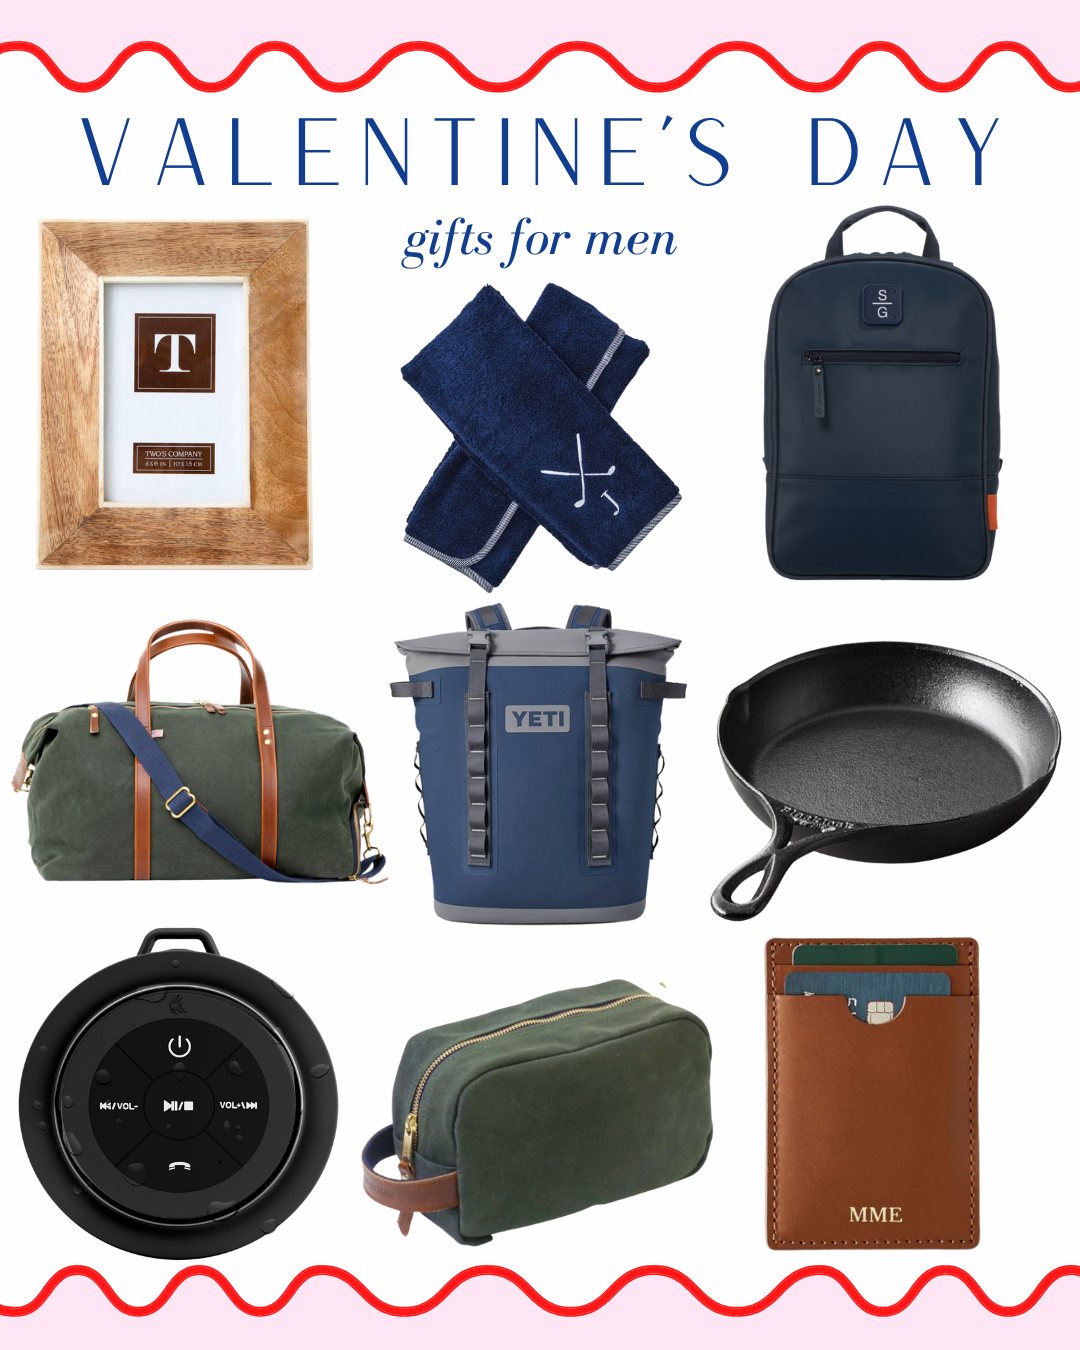 Valentine's Day gifts for dad, Valentine's Day ideas for dad, Valentine's gifts for fathers, Valentine's Day gifts for men, Valentine's Day gifts for husband, Valentine's Day gifts for men in your family